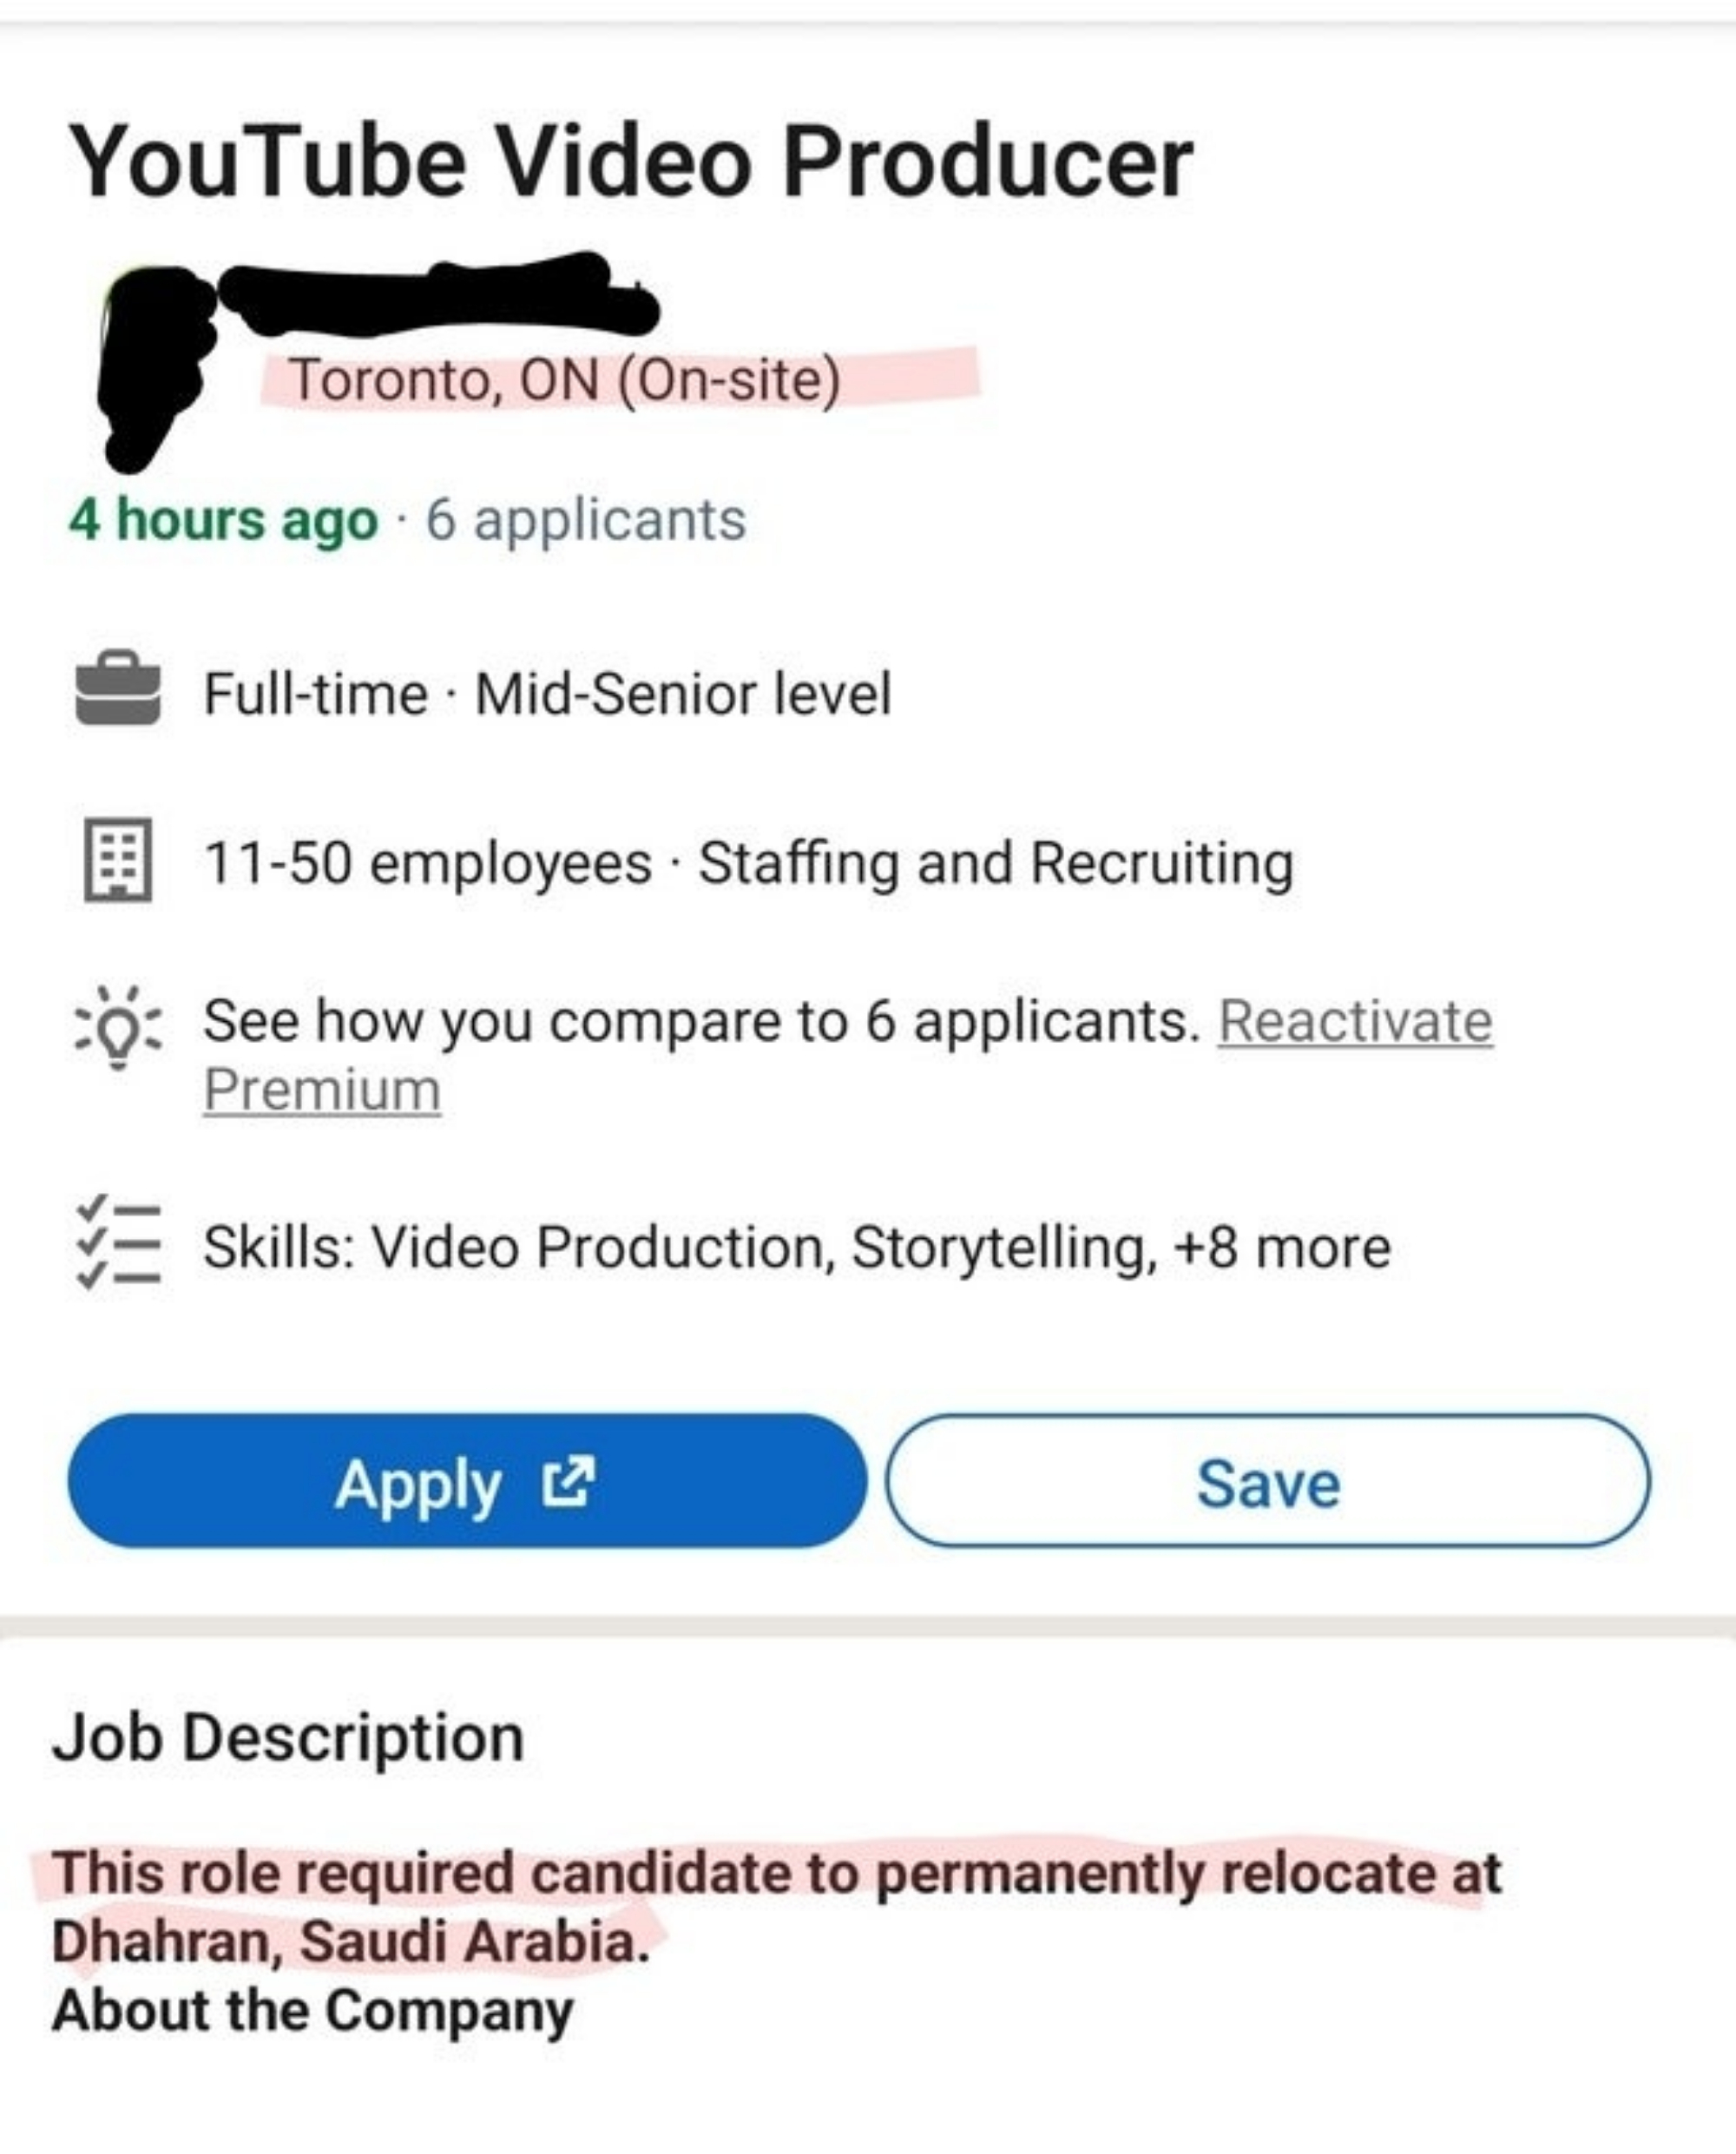 YouTube video producer ad says job is on-site in Toronto, but the job description says the role requires candidate to &quot;permanently relocate&quot; to Saudi Arabia